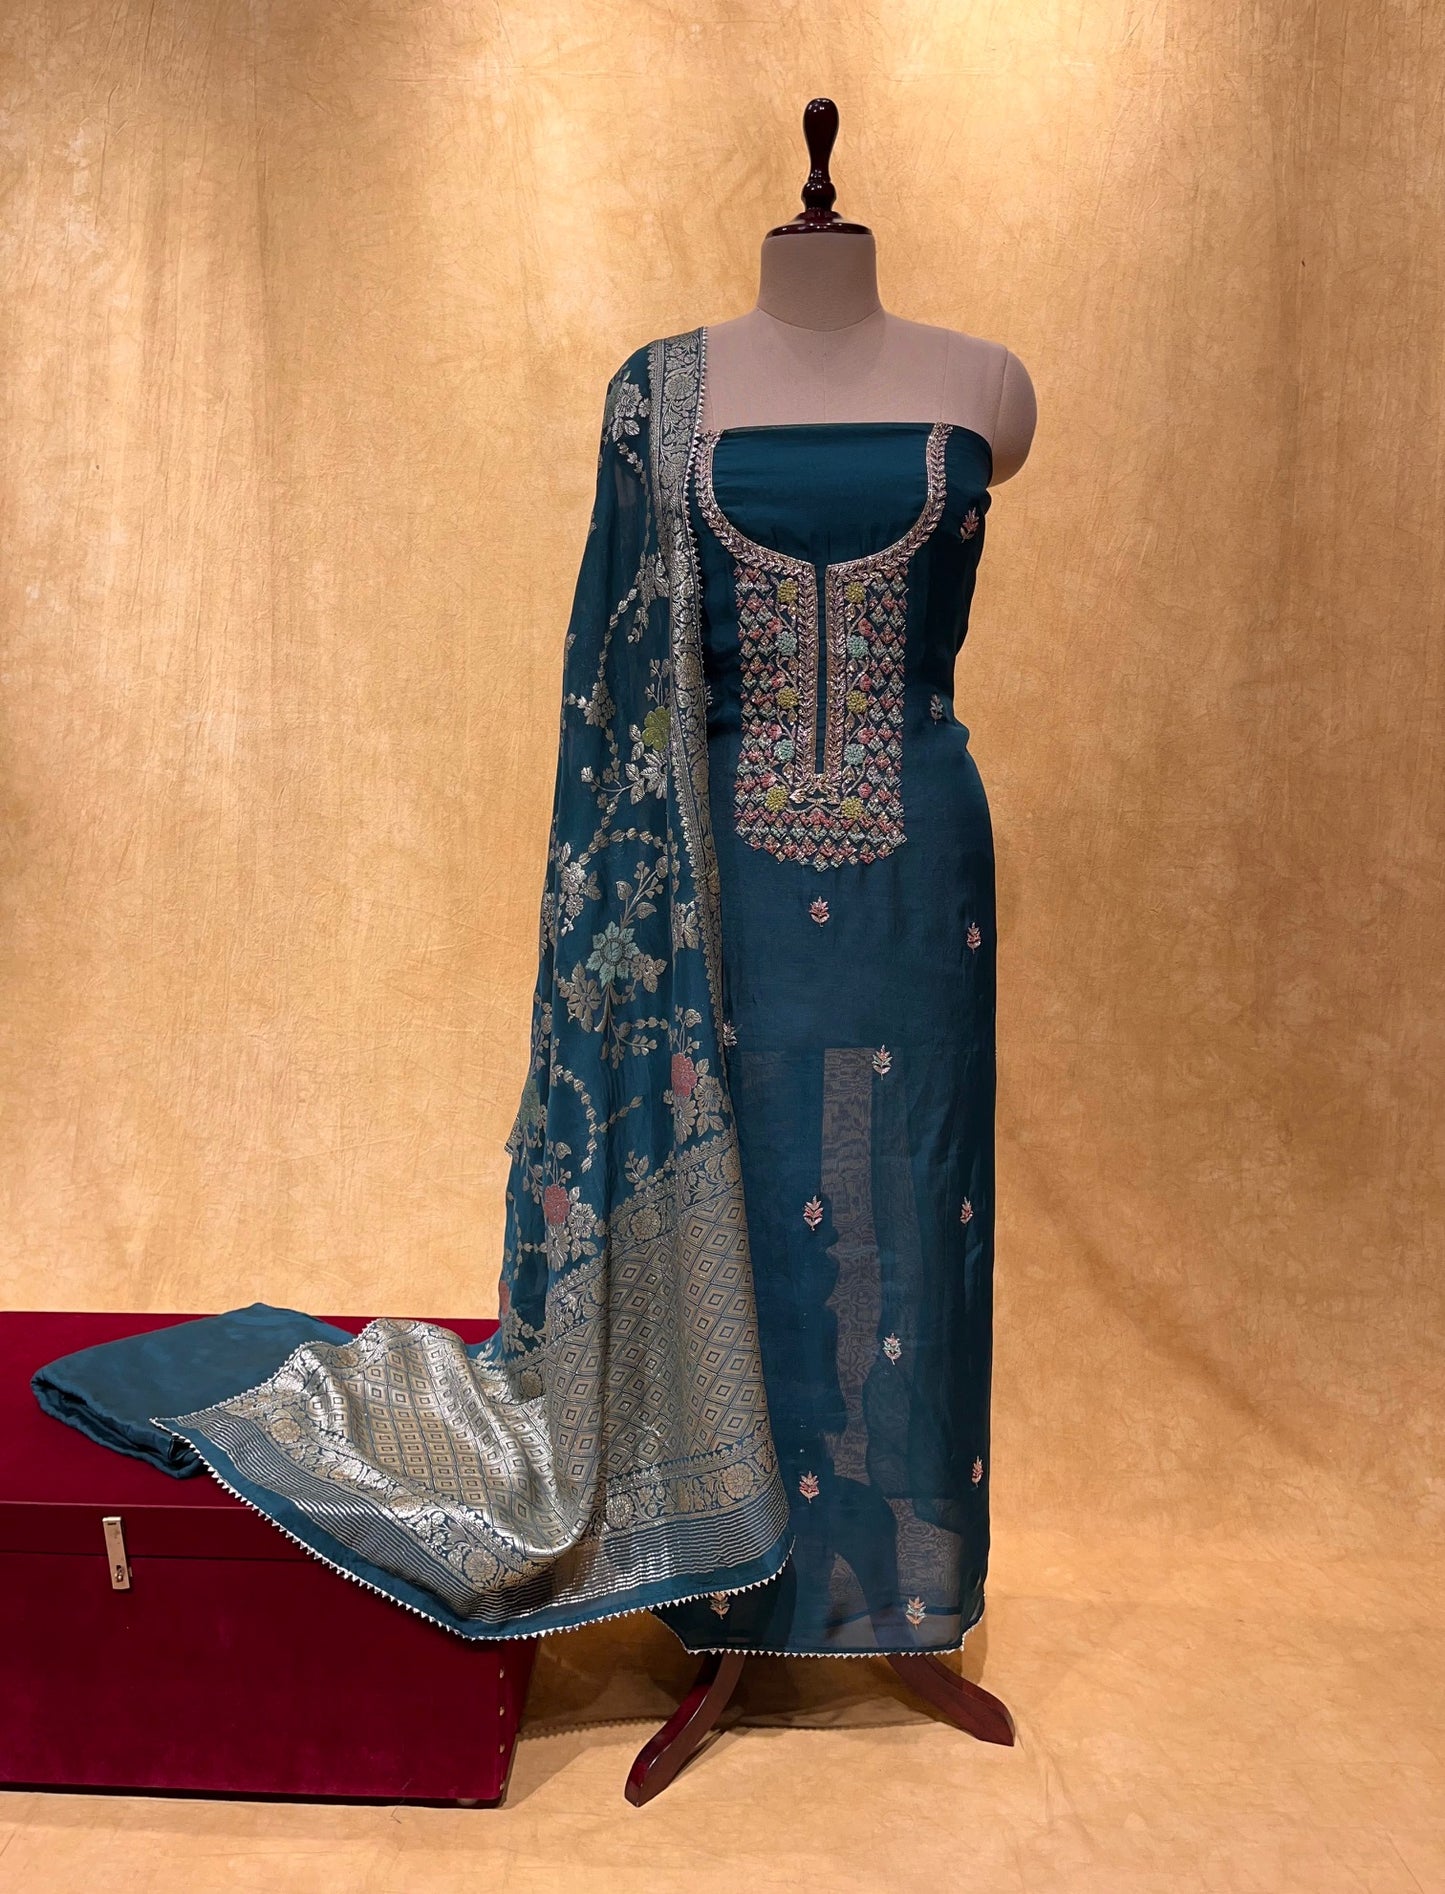 TEAL BLUE COLOUR UNSTITCHED ORGANZA SUIT EMBELLISHED WITH ZARDOZI WORK